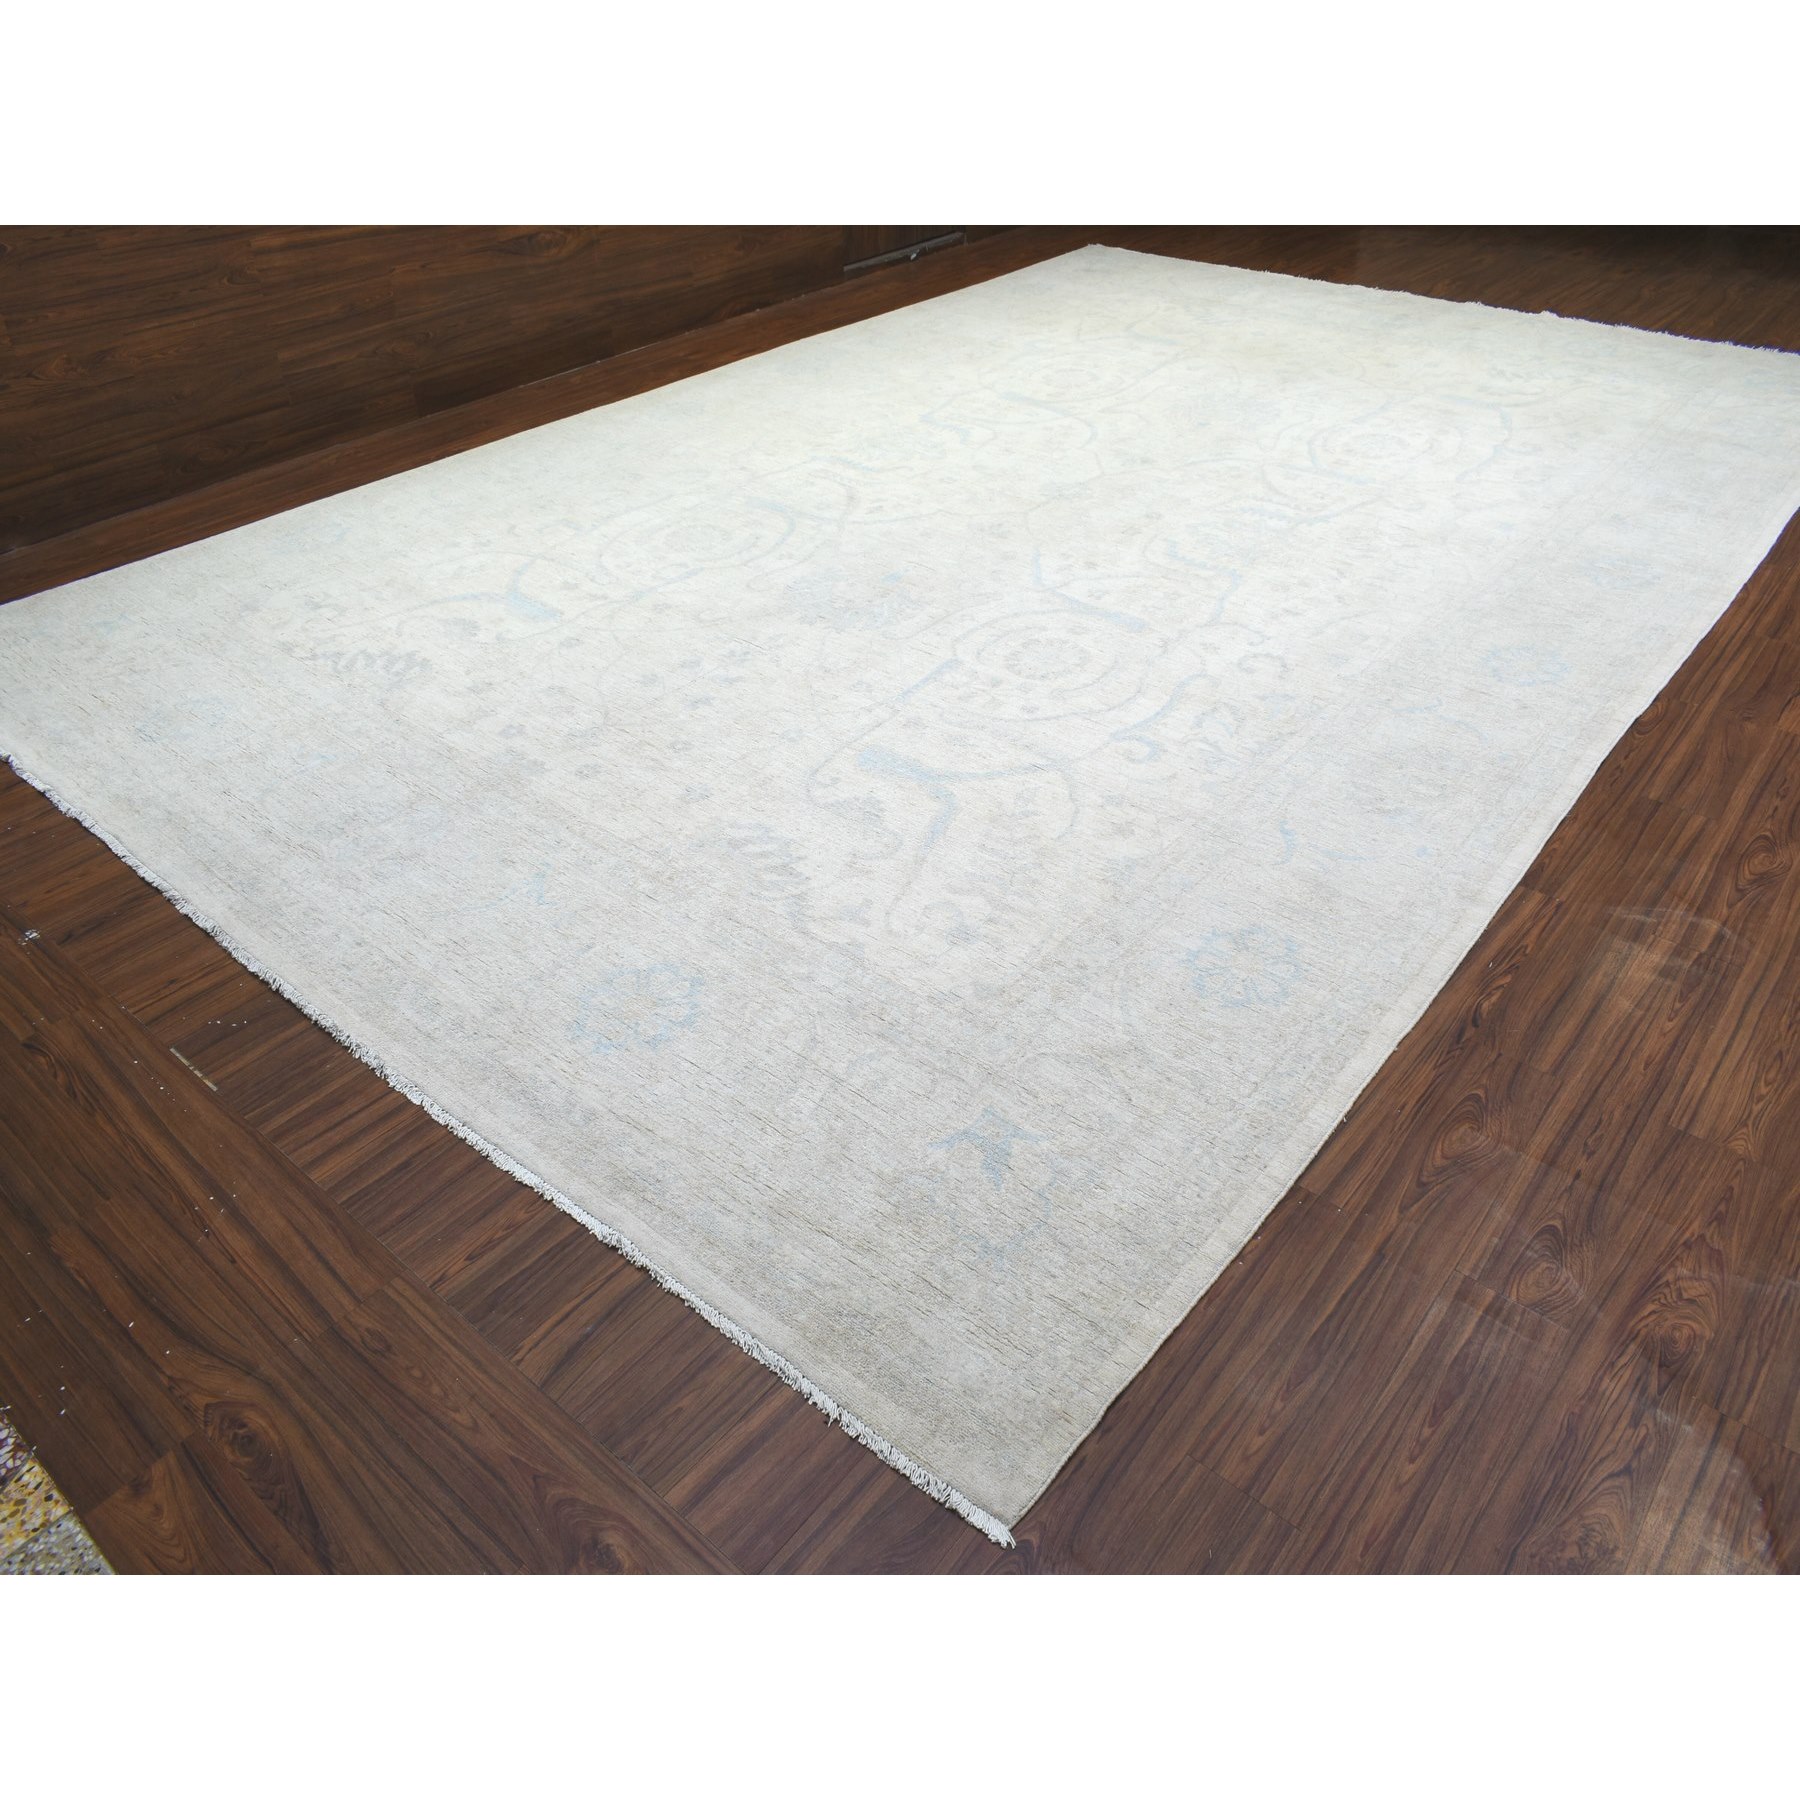 11'9"x17'10" Ivory, Soft Organic Wool Hand Woven, White Wash Peshawar with All Over Design Natural Dyes, Oversized Oriental Rug 